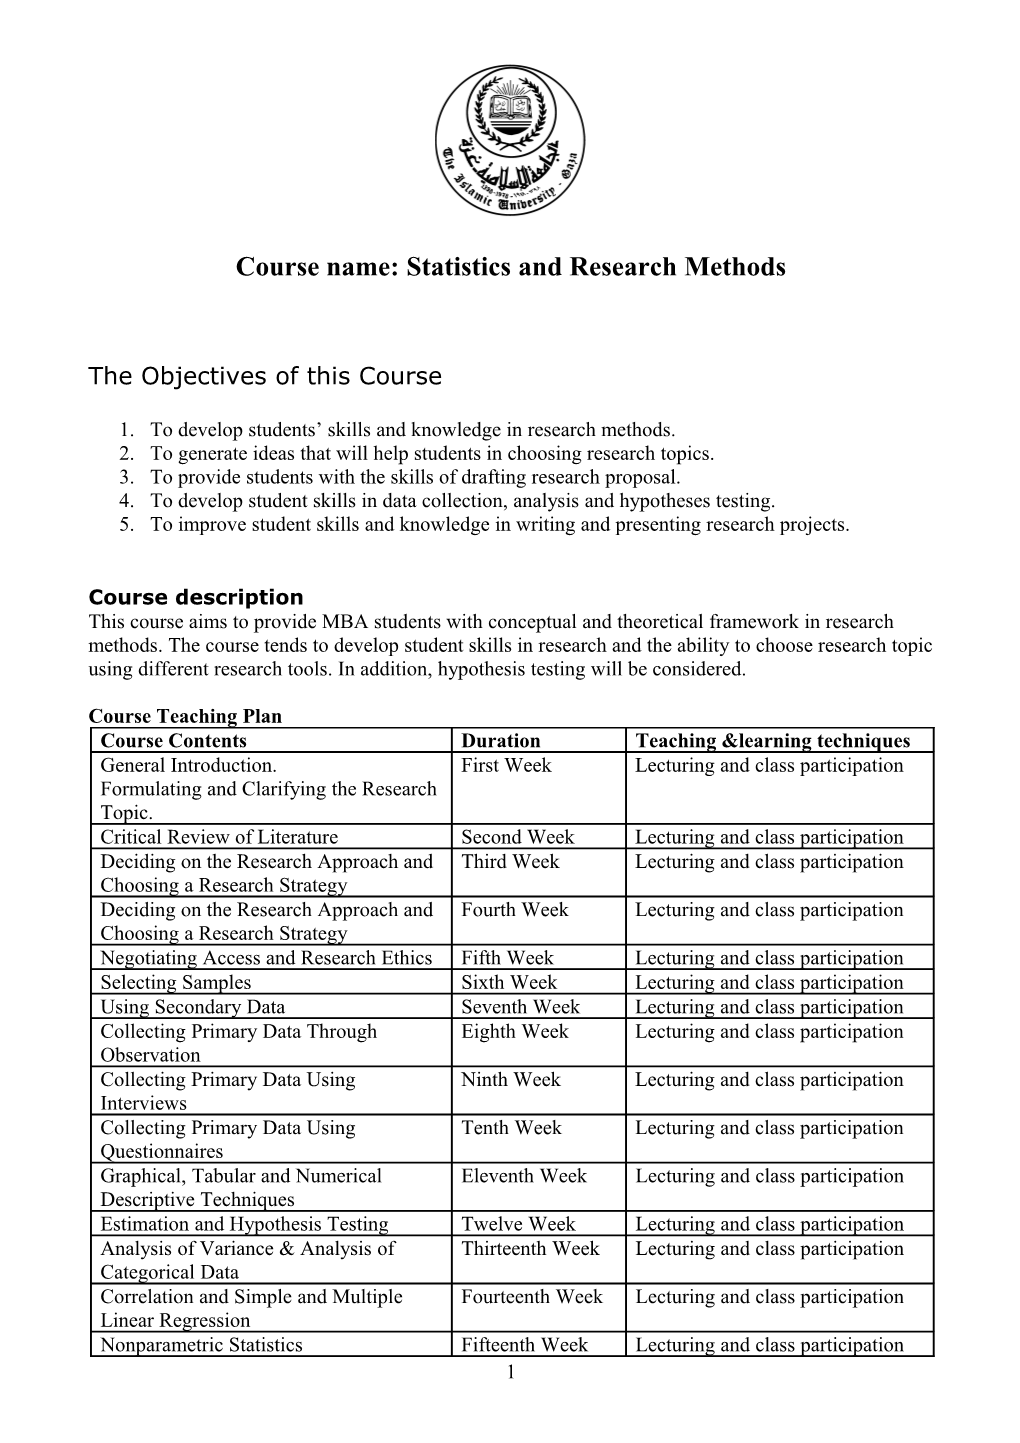 Course Name: Statistics and Research Methods